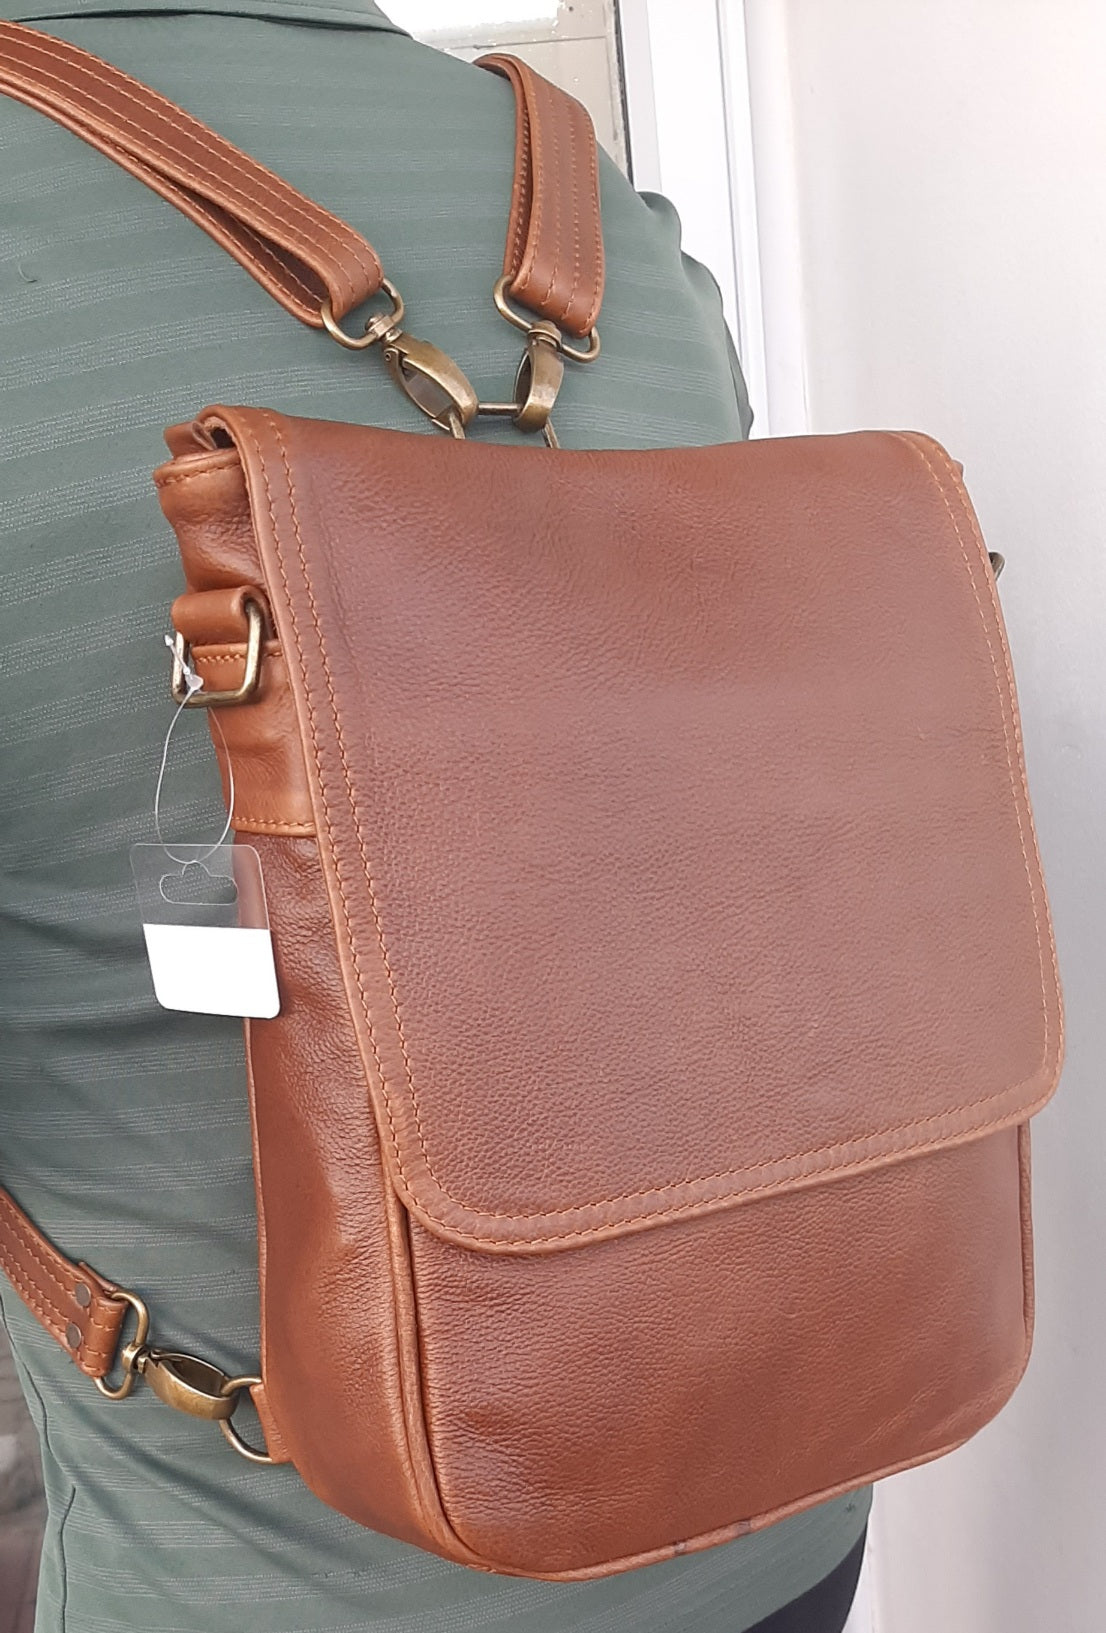 A man carrying a beautiful genuine leather hand made 2 in 1 Am messenger backpack in pecan tan 